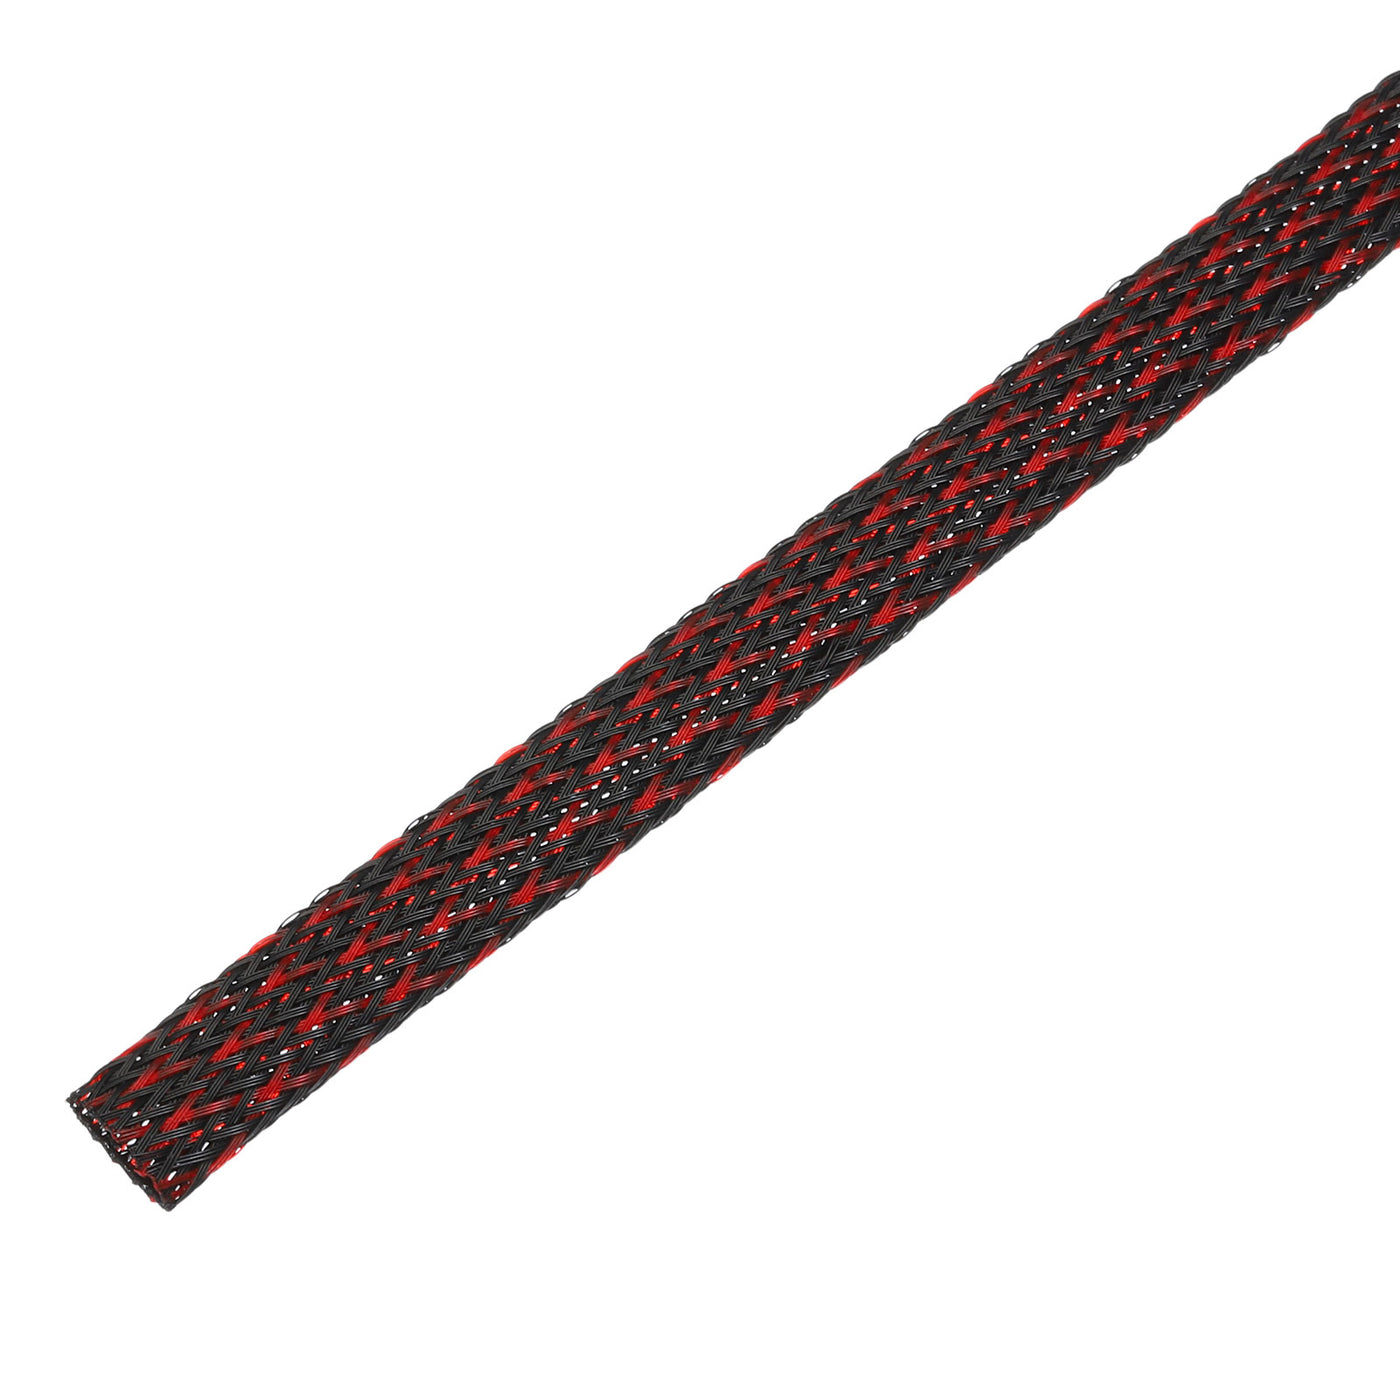 uxcell Uxcell Insulation Braid Sleeving, 9.84 Ft-10mm High Temperature Sleeve Black Red